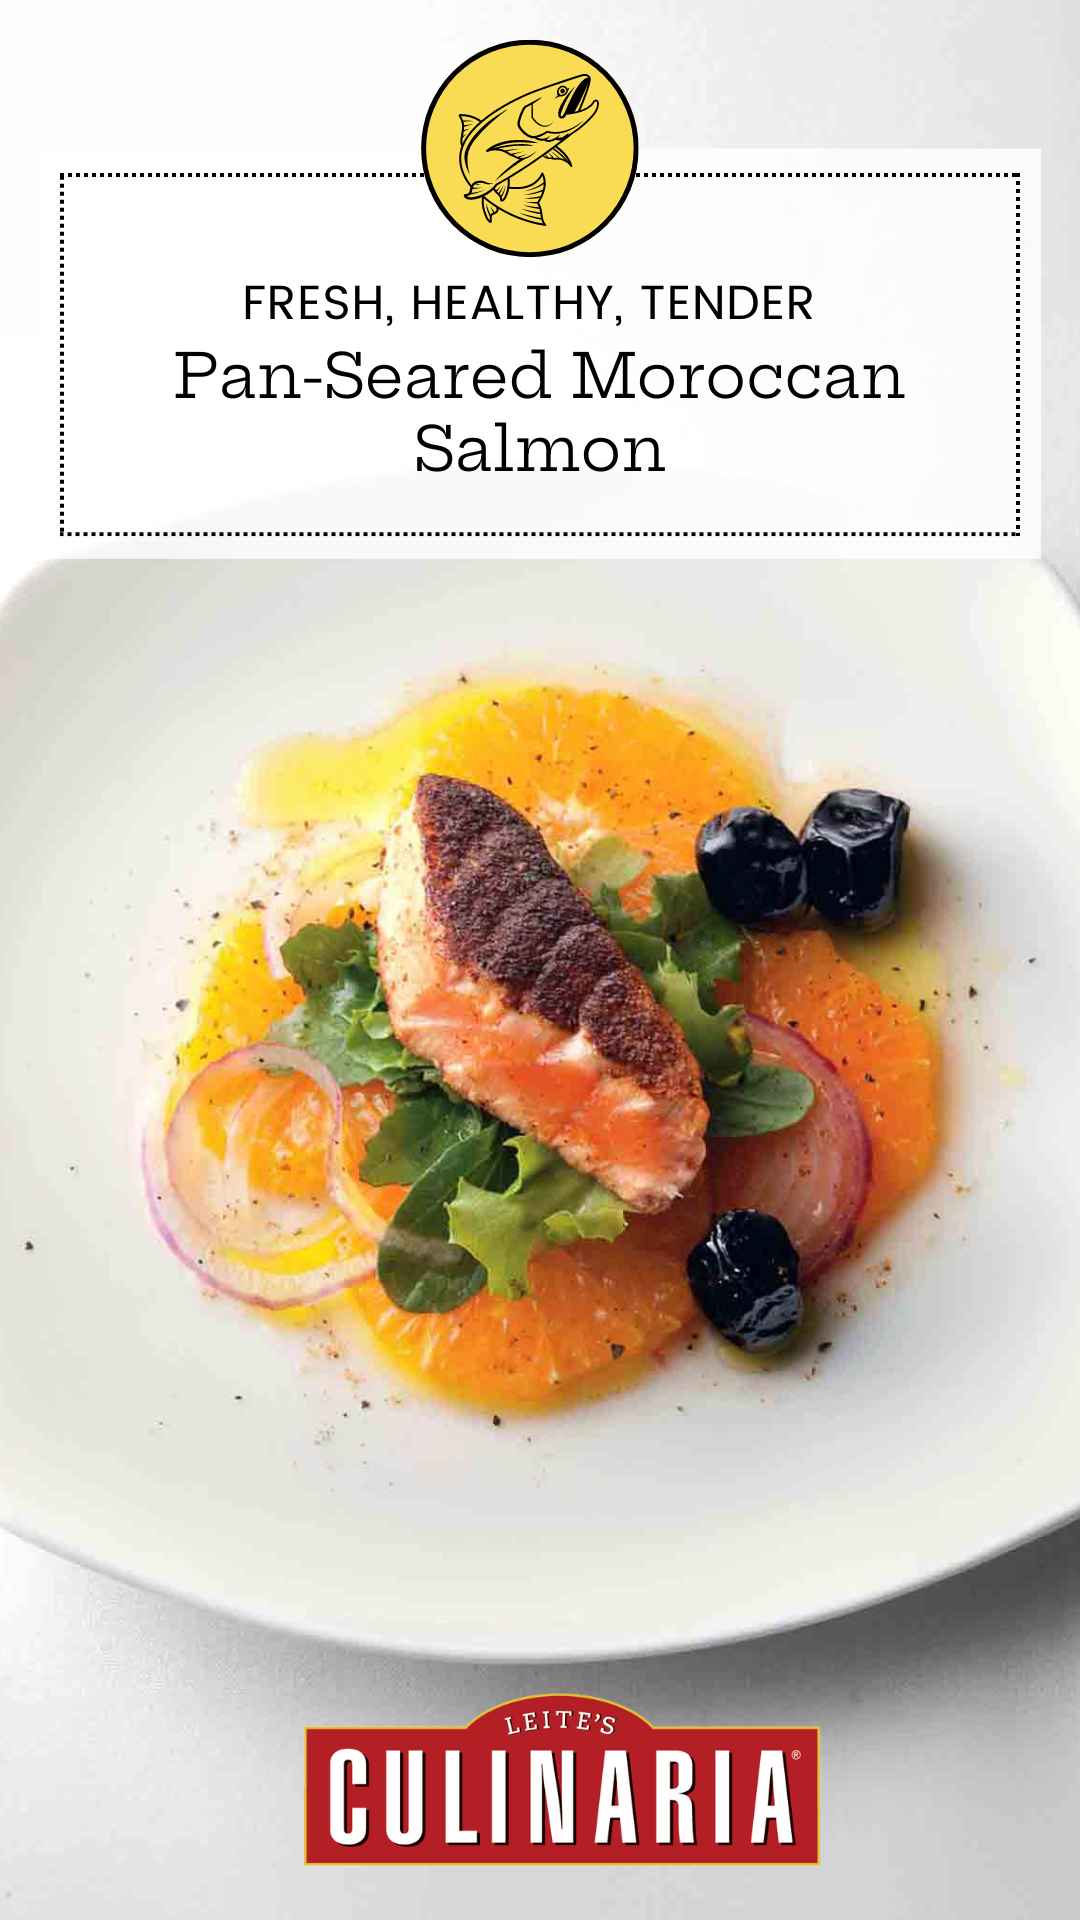 A piece of crispy salmon on top of sliced oranges, lettuce, black olives, and thinly sliced red onion on a white plate.